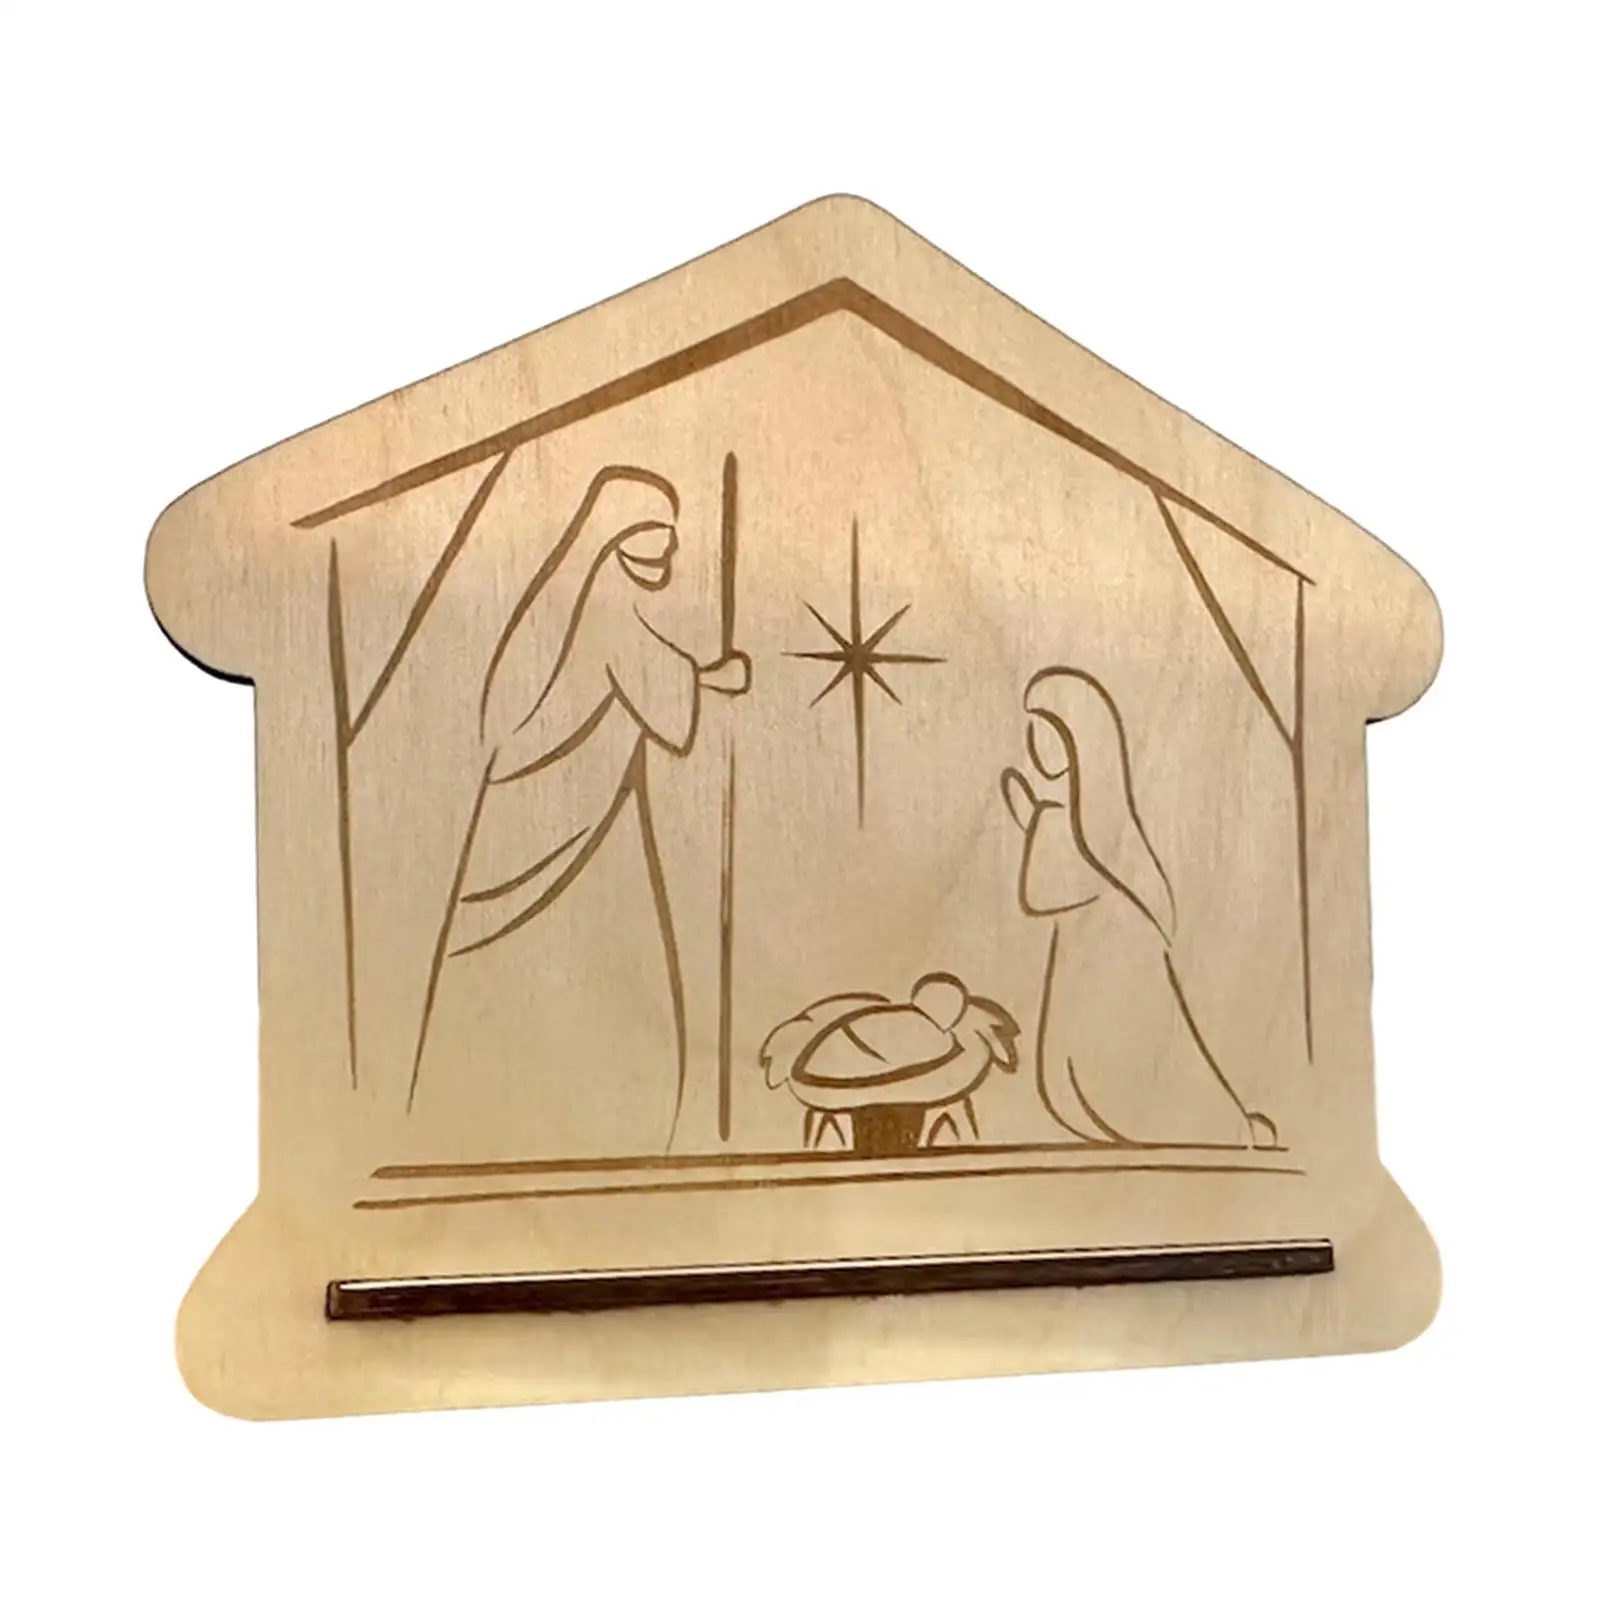 The Birth of Jesus Decorations Wooden Festival Ornament Christian Ornaments for Home Table Centerpiece Fireplace Family Indoor